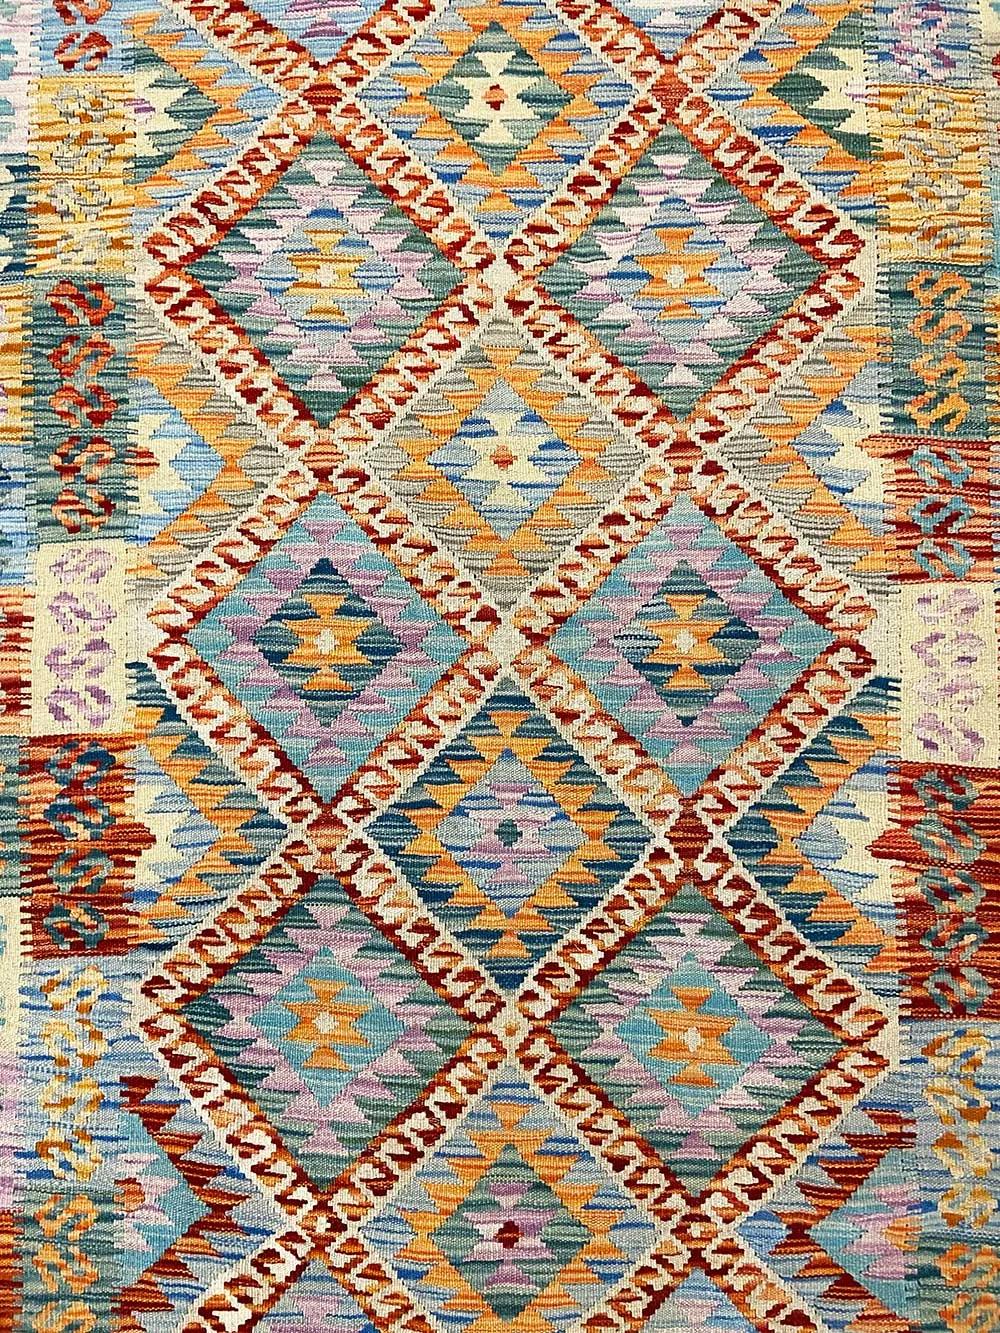 Hand-Woven All Wool Colorful Kilim 5' 3